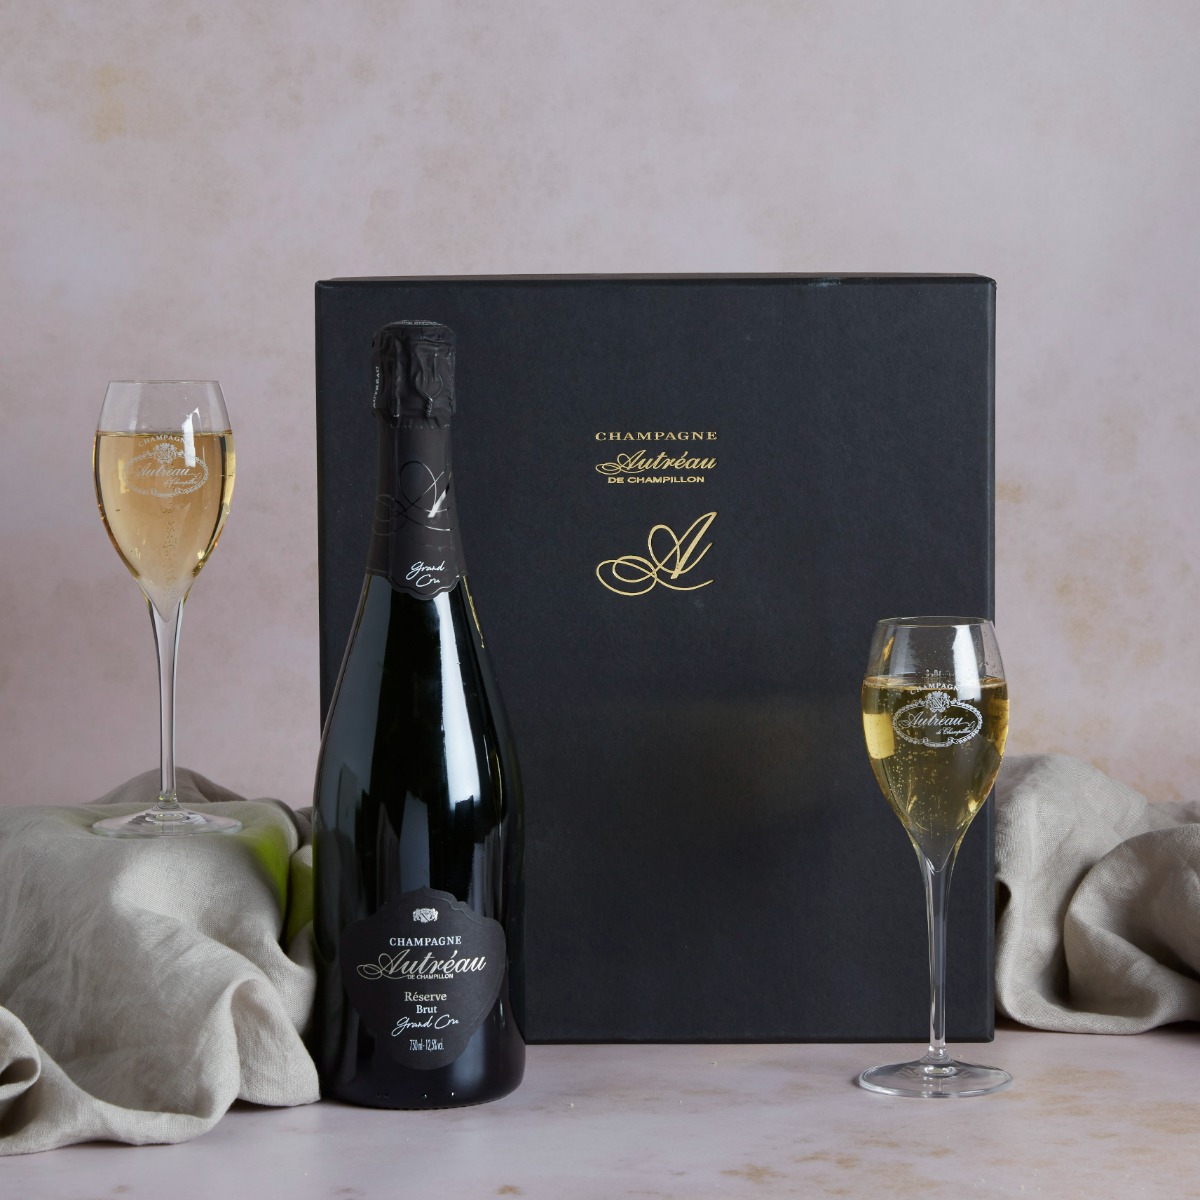 Luxury Champagne & Glasses Gift Box Champagne gifts Hampers.com